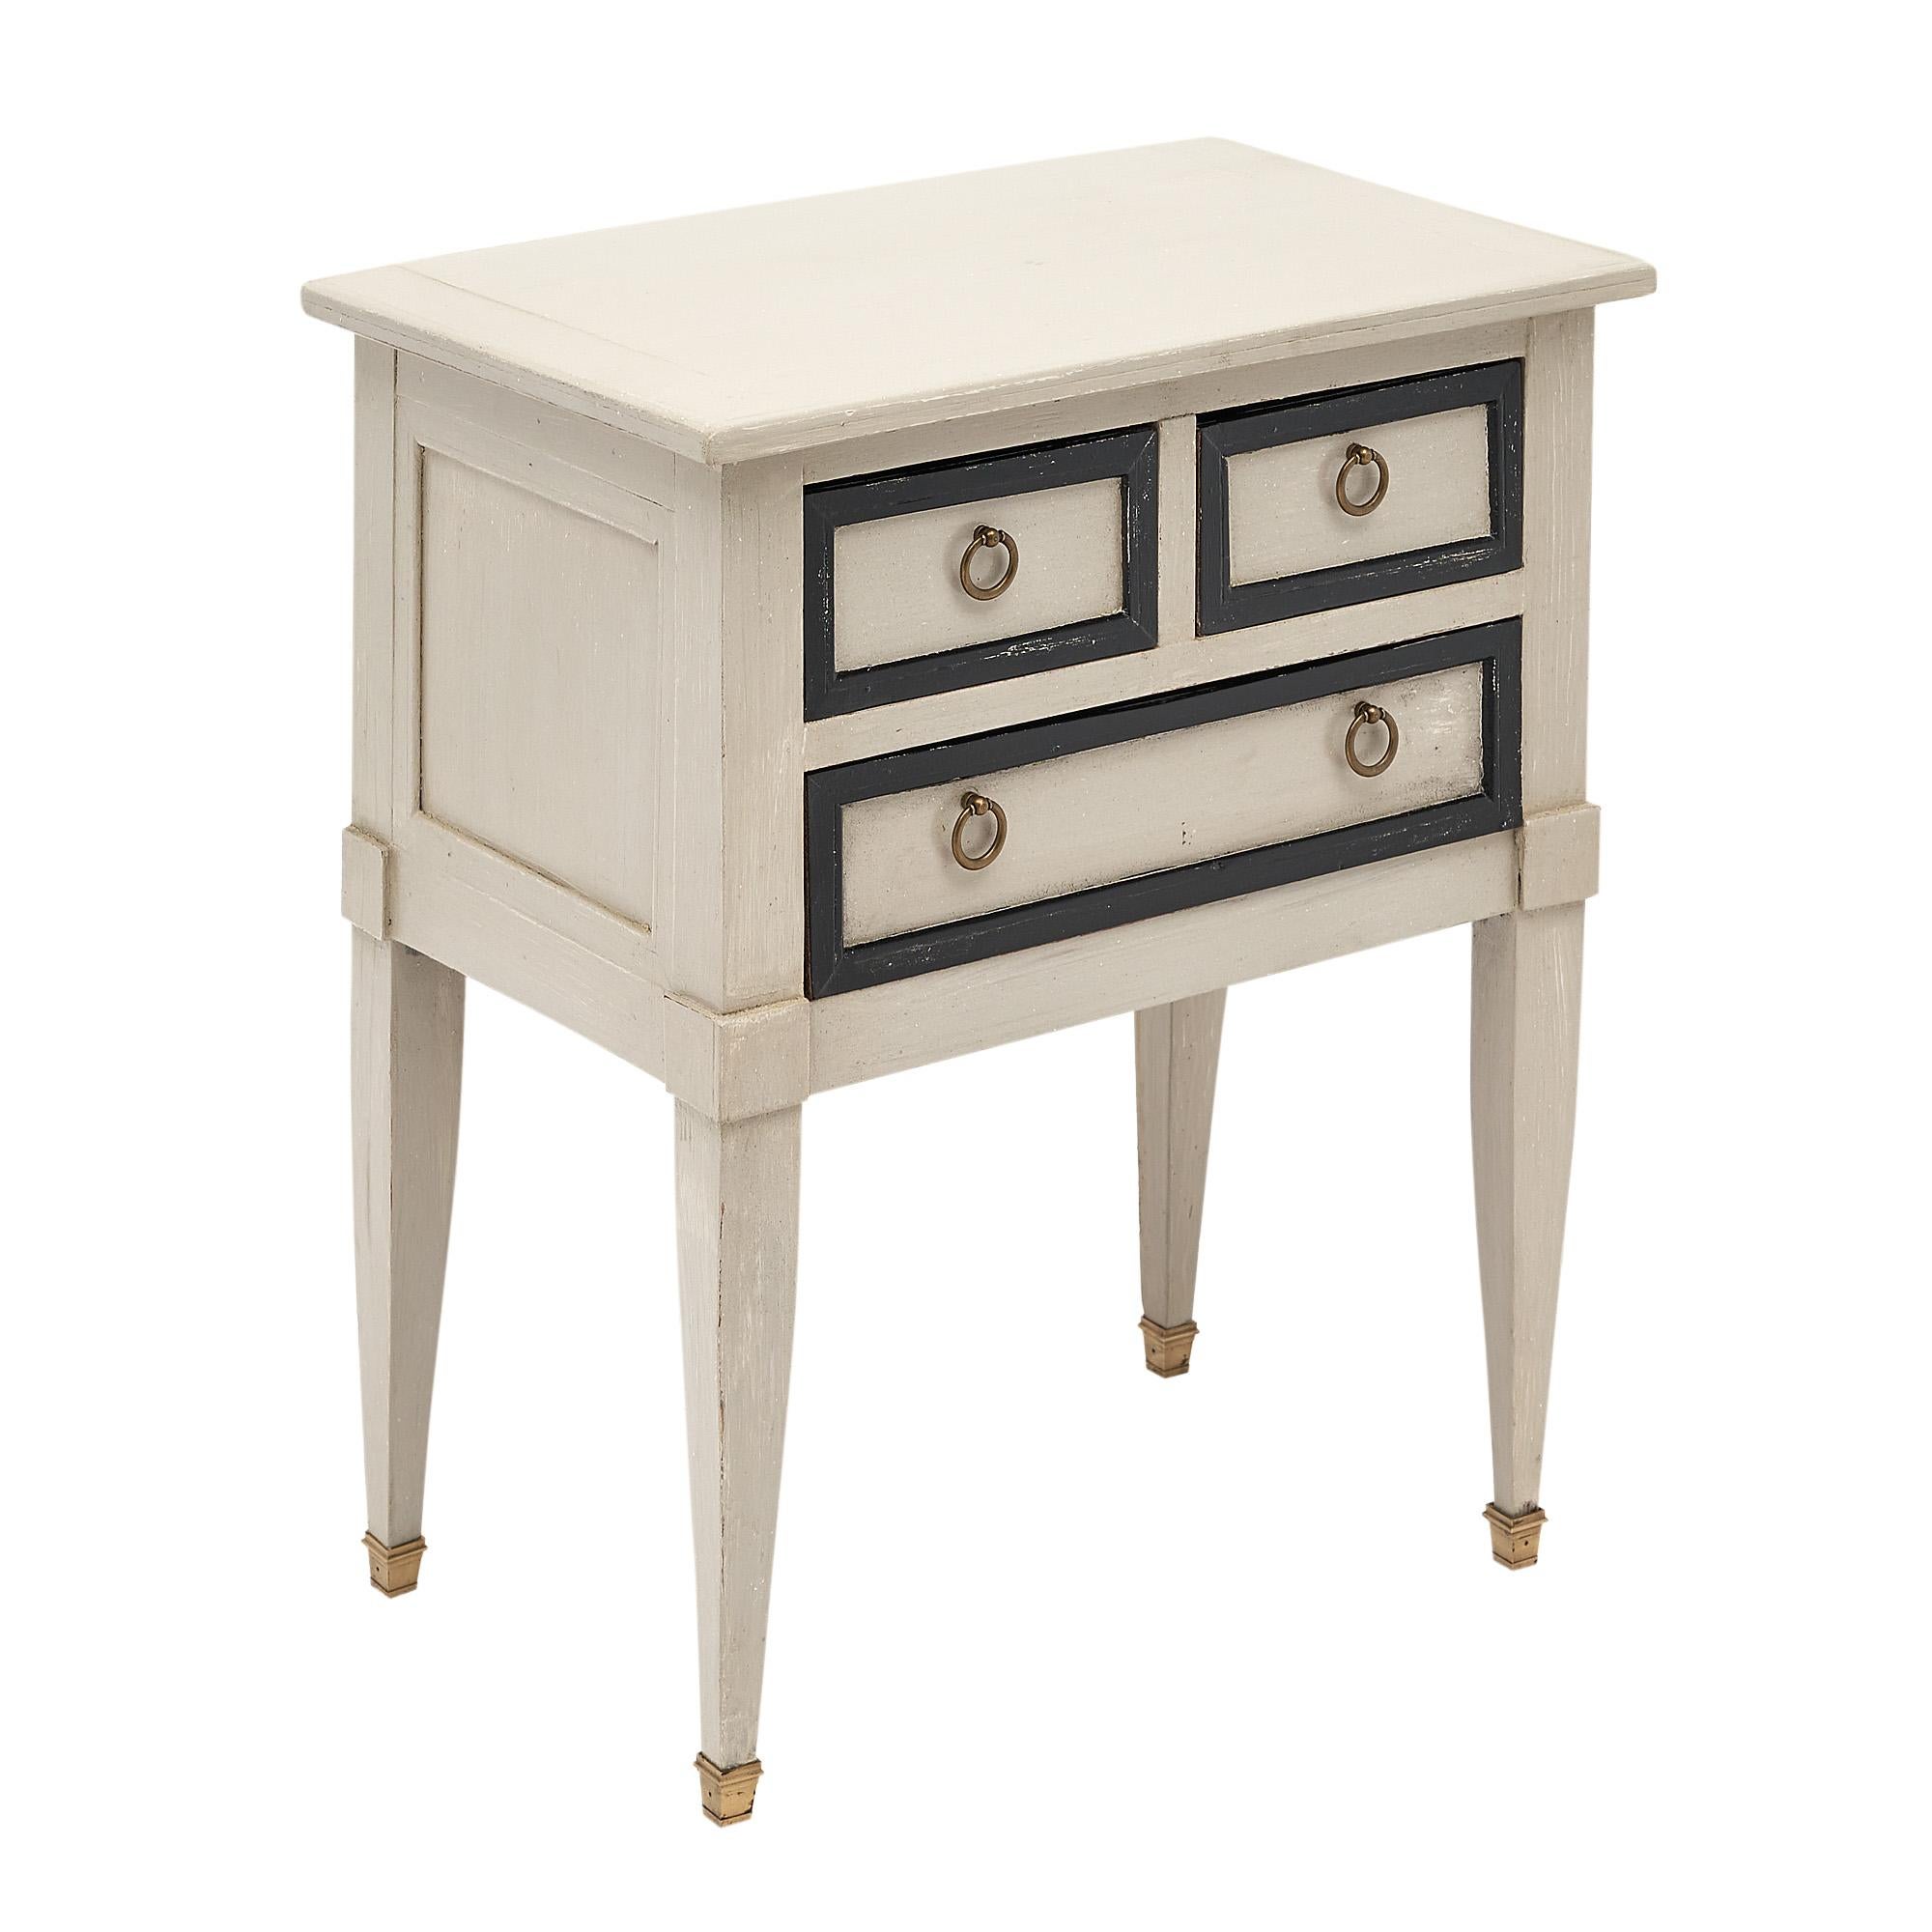 Side table, French, made of cherry wood with a hand painted “Trianon” gray finish and black hand painted trim. Three dovetailed drawers have brass hardware rings. The tapered legs are capped with brass feet.